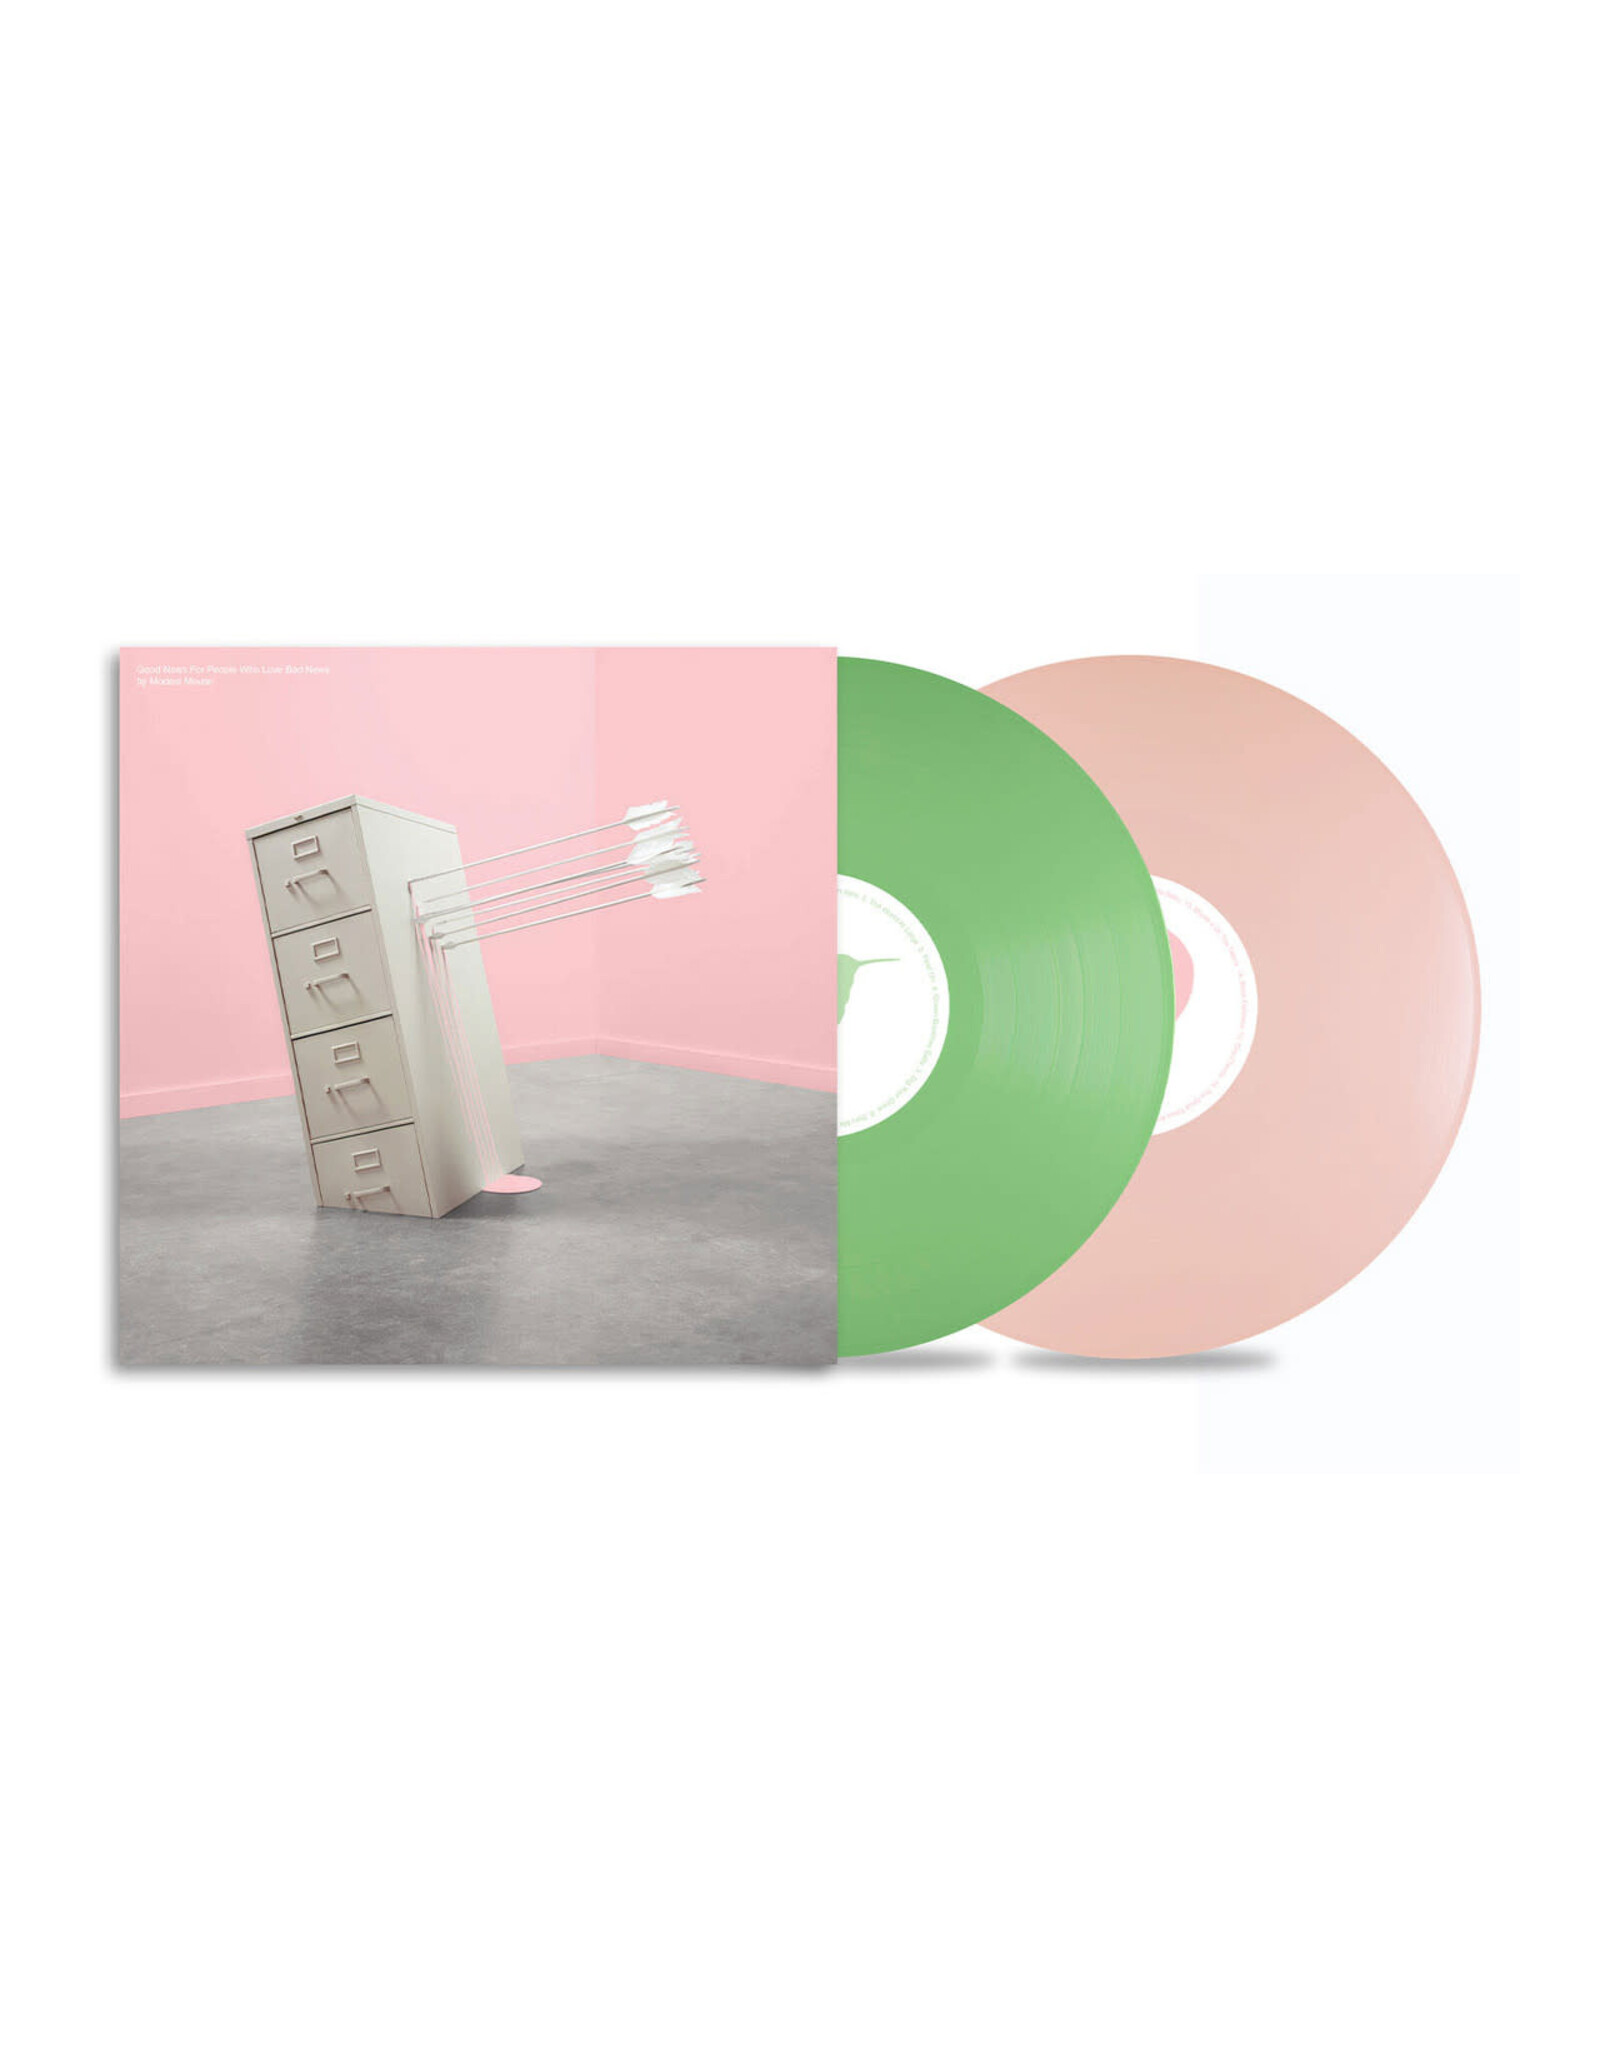 Modest Mouse - Good News For People Who Like Bad News (Deluxe Edition) [Green & Pink Vinyl]